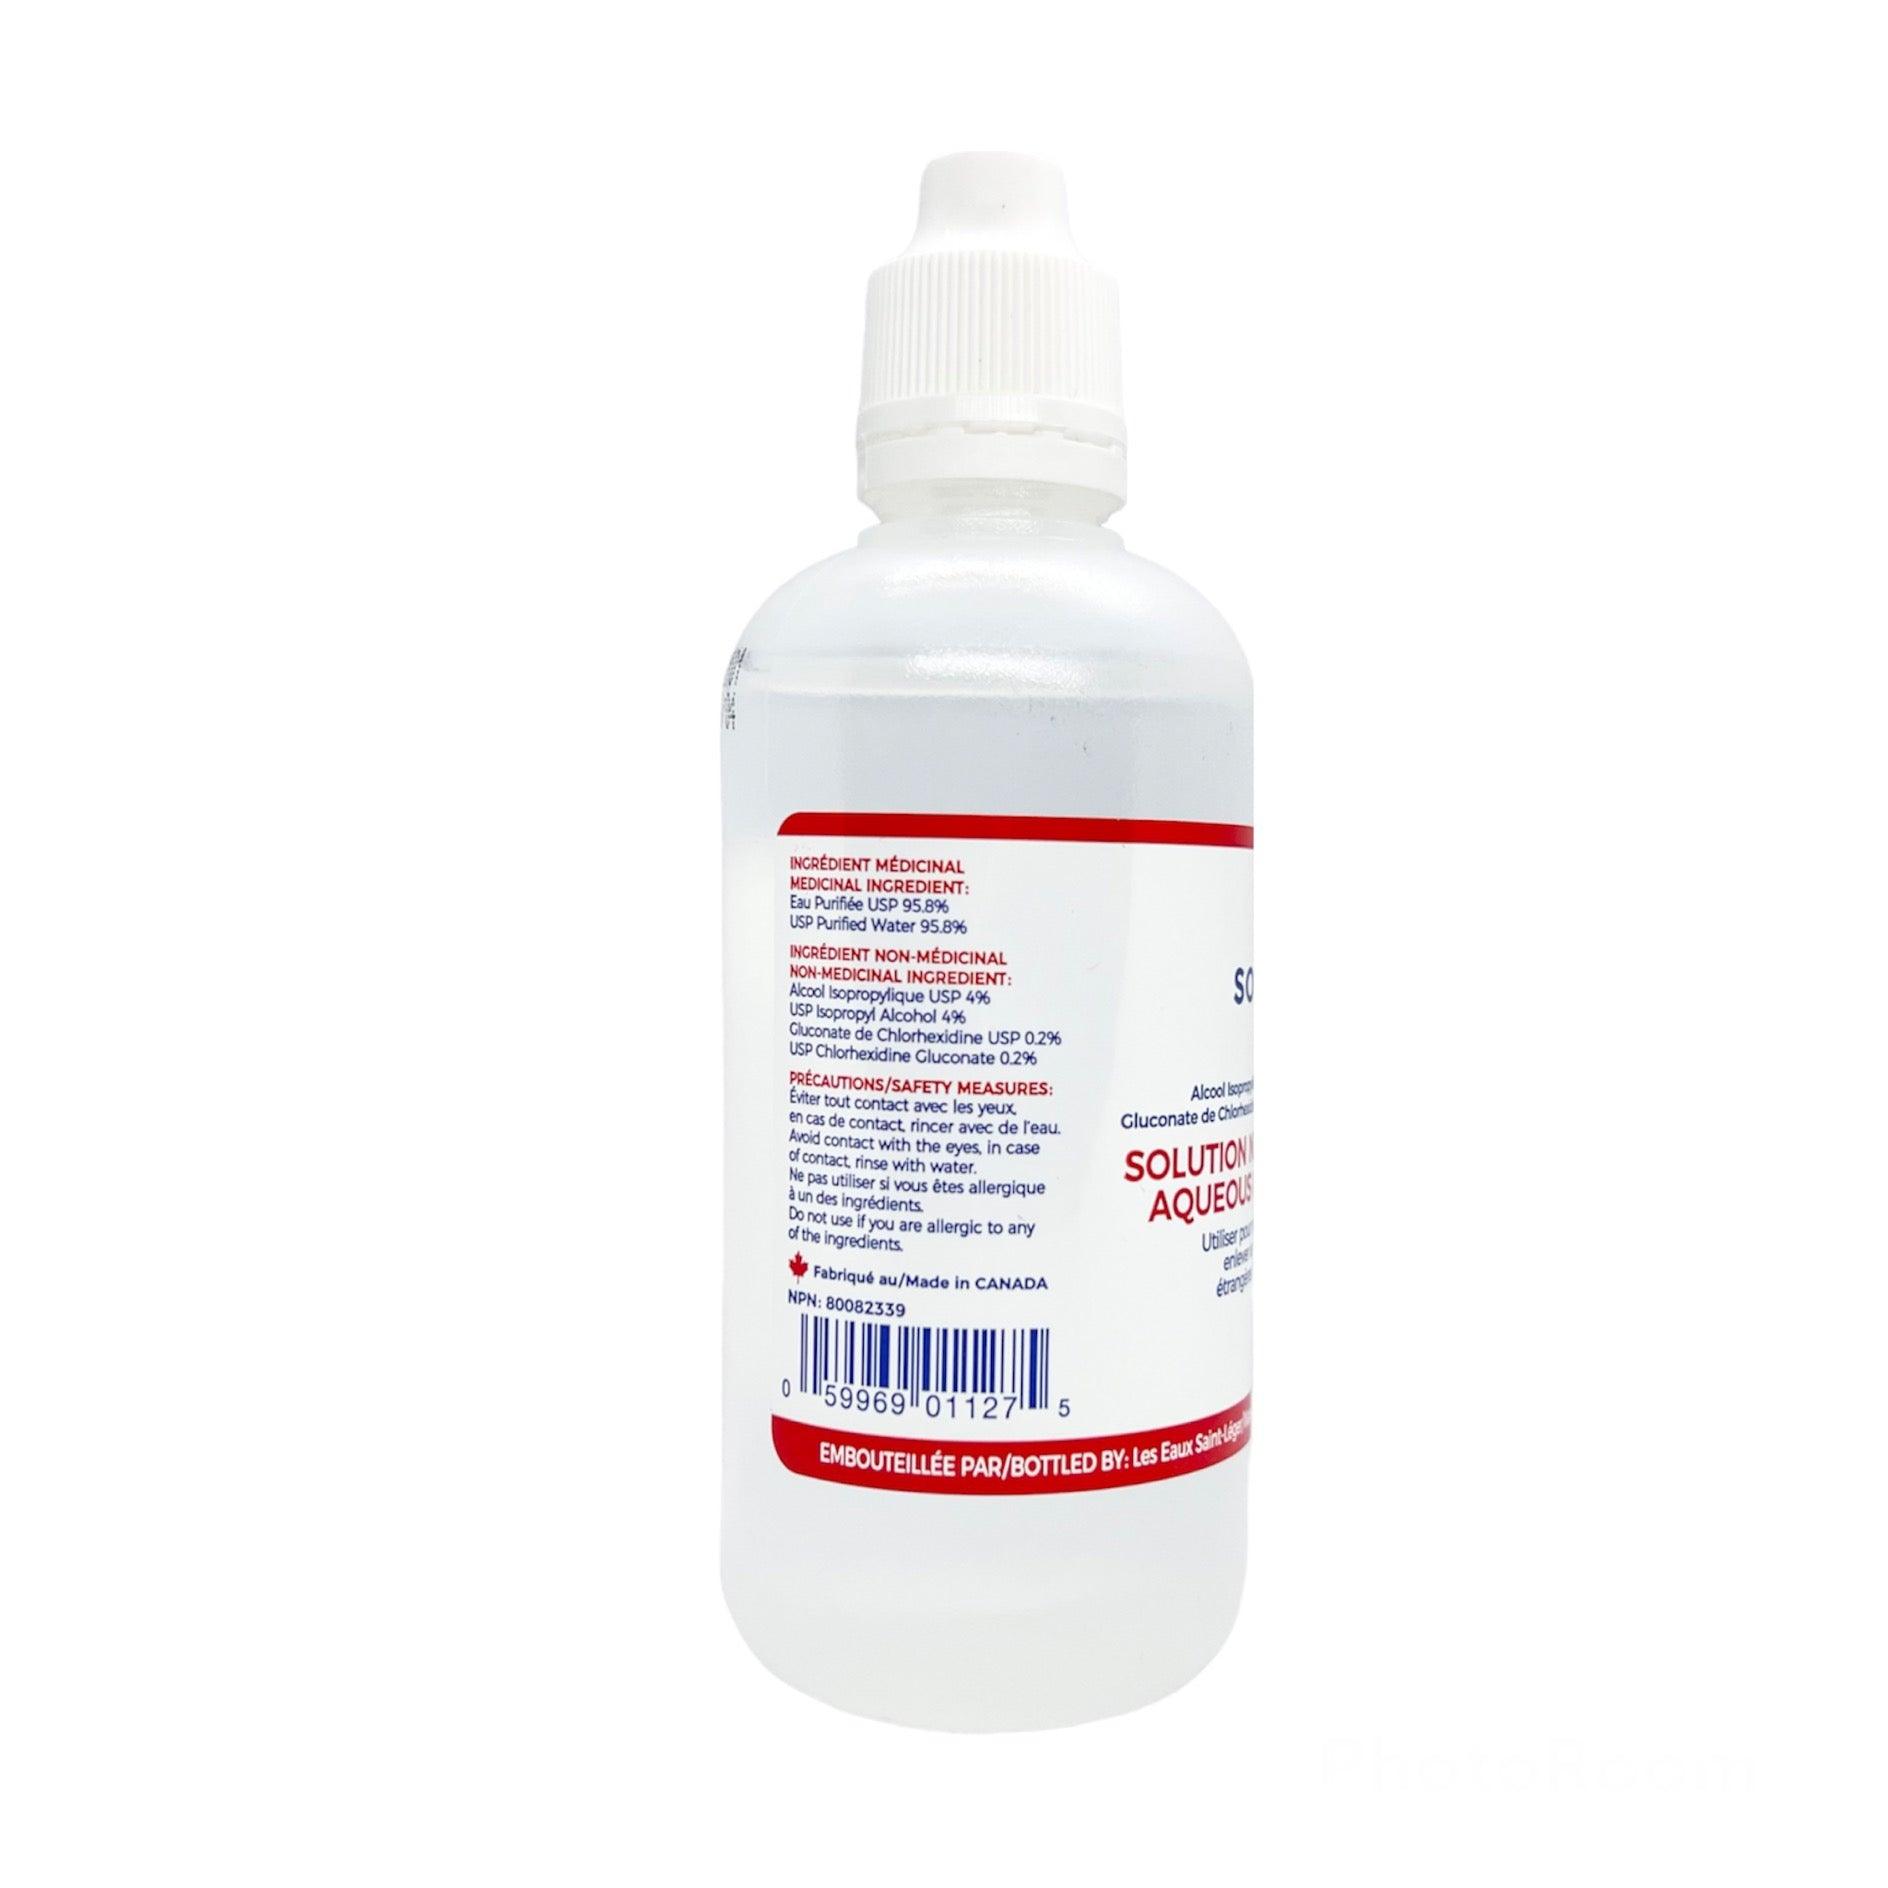 Solexin H2O - Sterile Aqueous Cleaning Solution w/ Alcohol - 120mL (24Bottles)